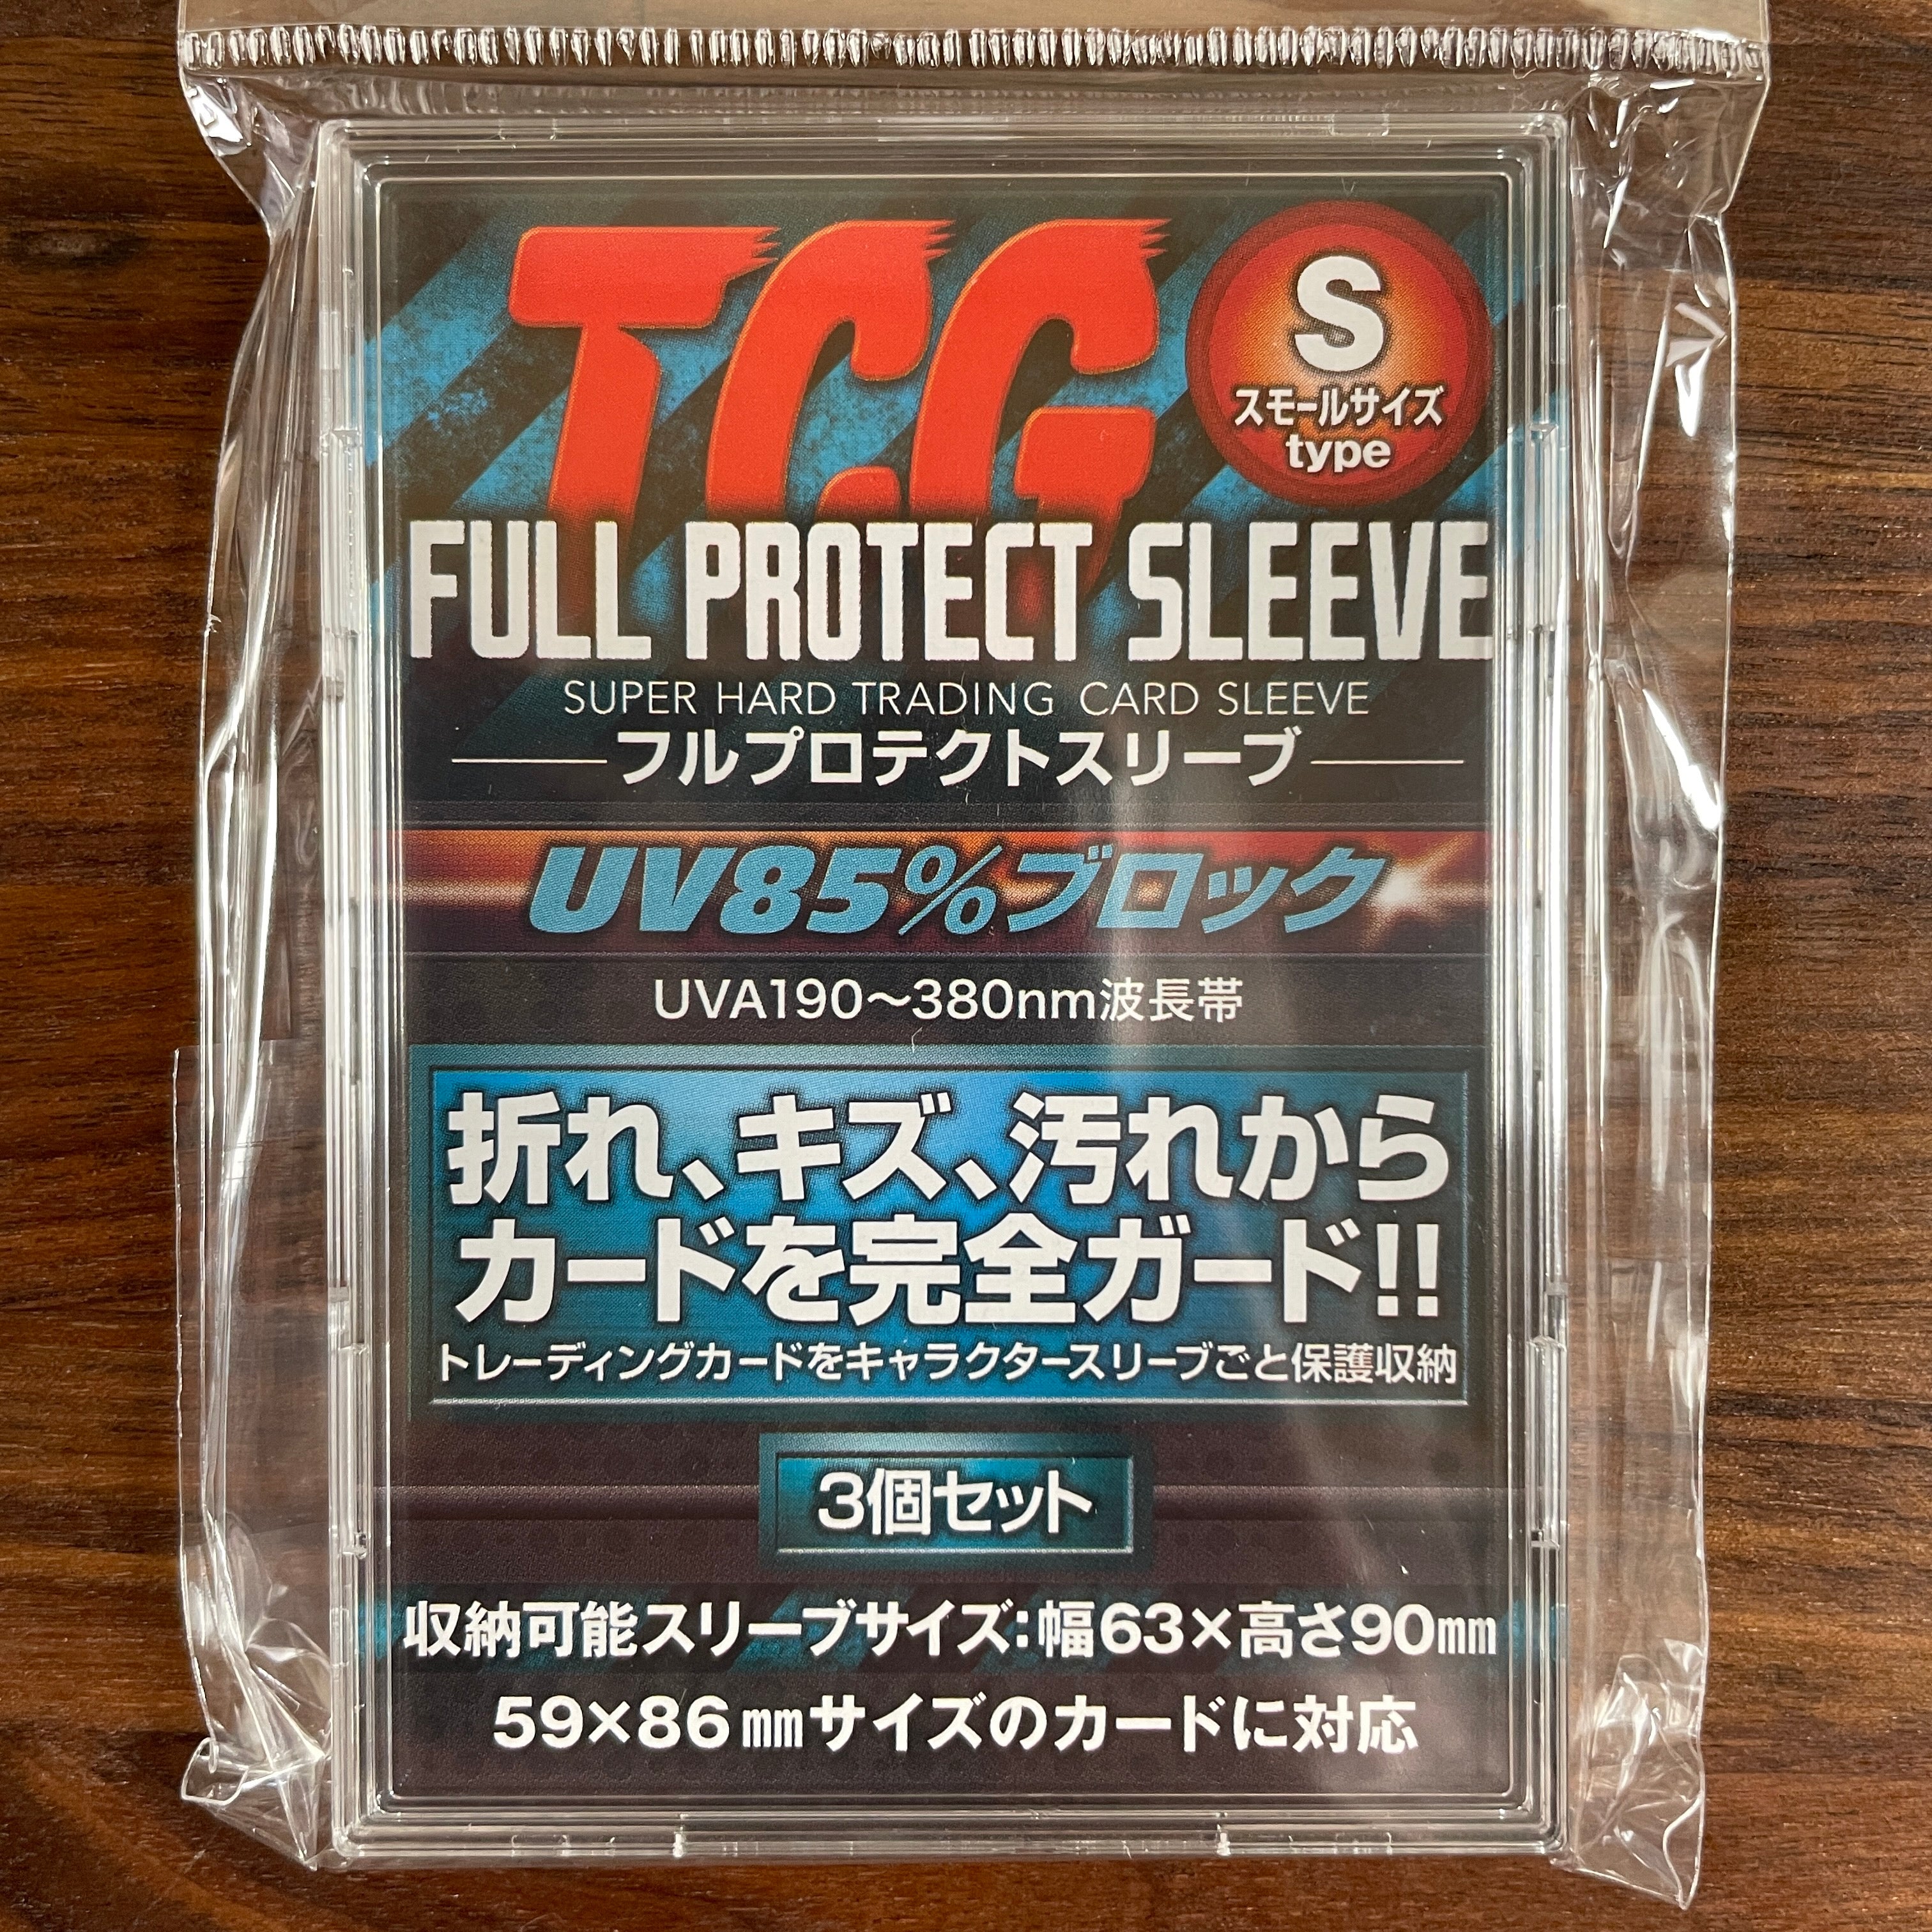  FULL PROTECT SLEEVE SUPER HARD TRADING CARD SLEEVE Small size type (set of 3)